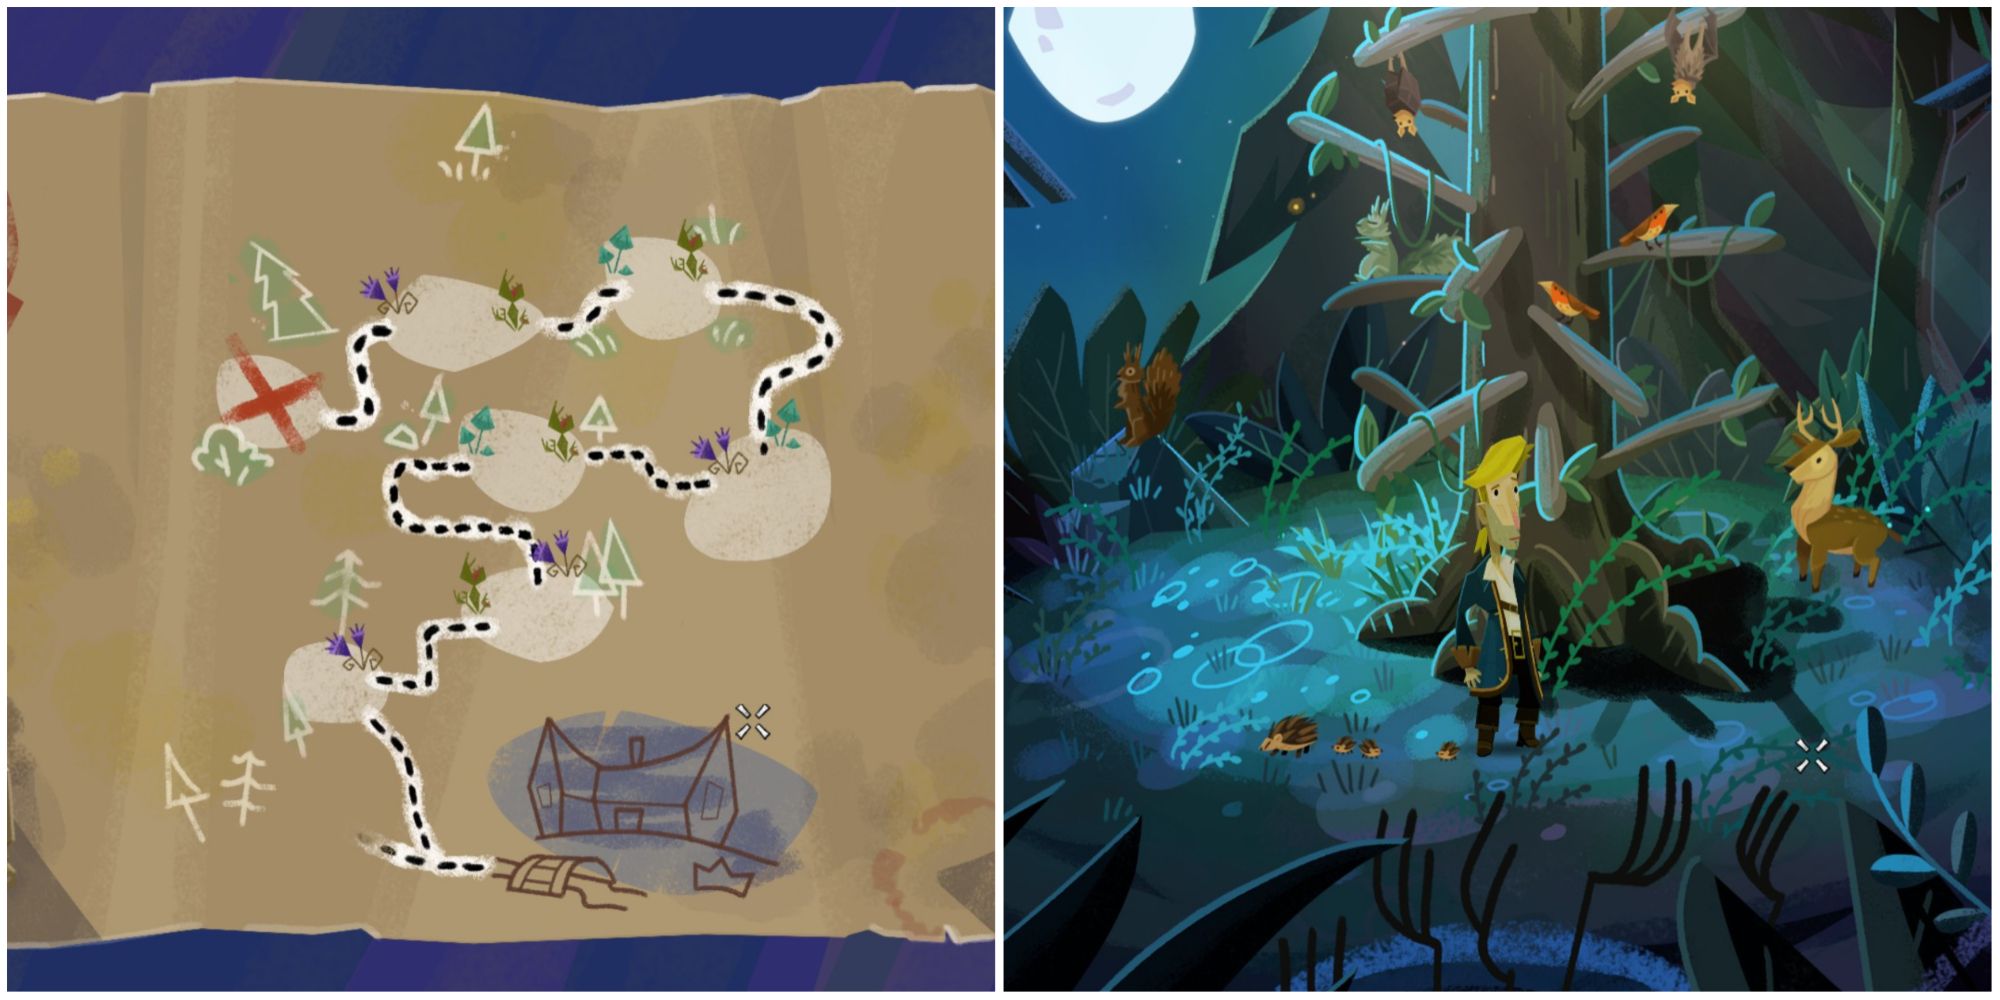 Return to Monkey Island Map and Mop-handle Tree